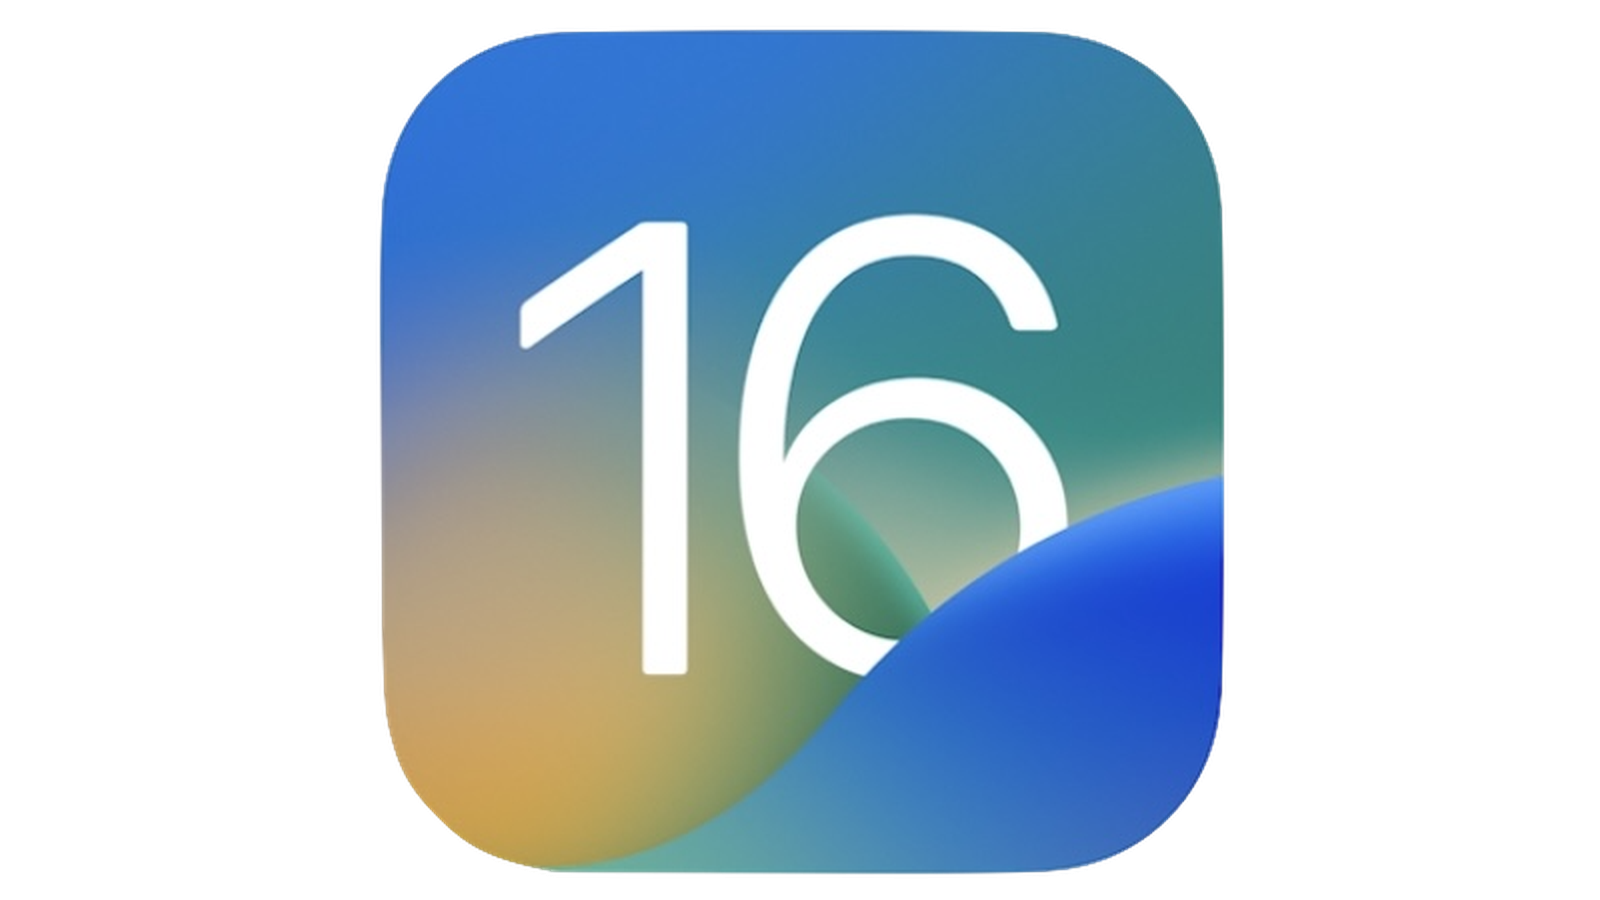 iOS 16: Apple Latest iPhone Software, Available Now